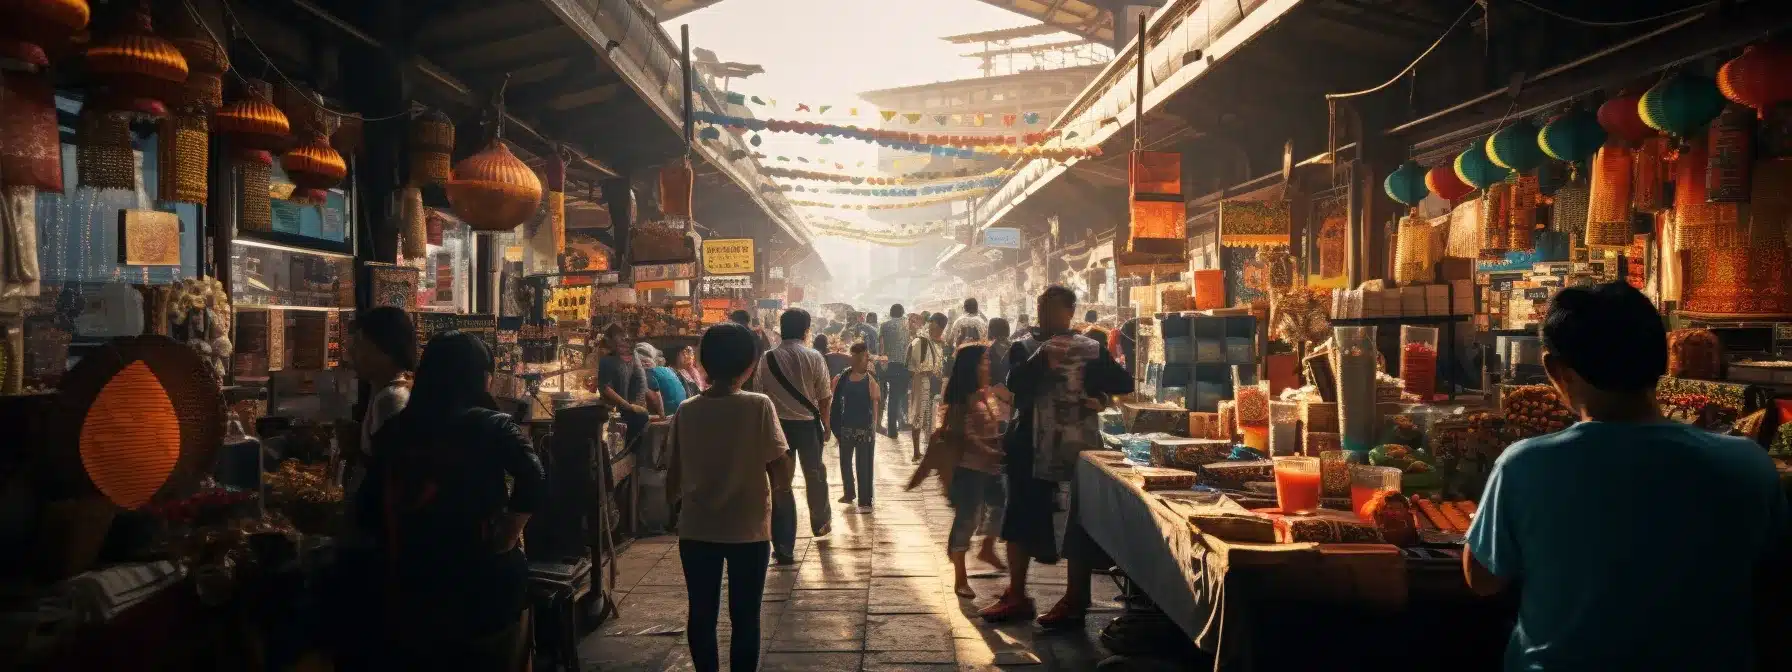 A Bustling Bazaar With Colorful Sights And Sounds, Haggling, And Taste Of Success.